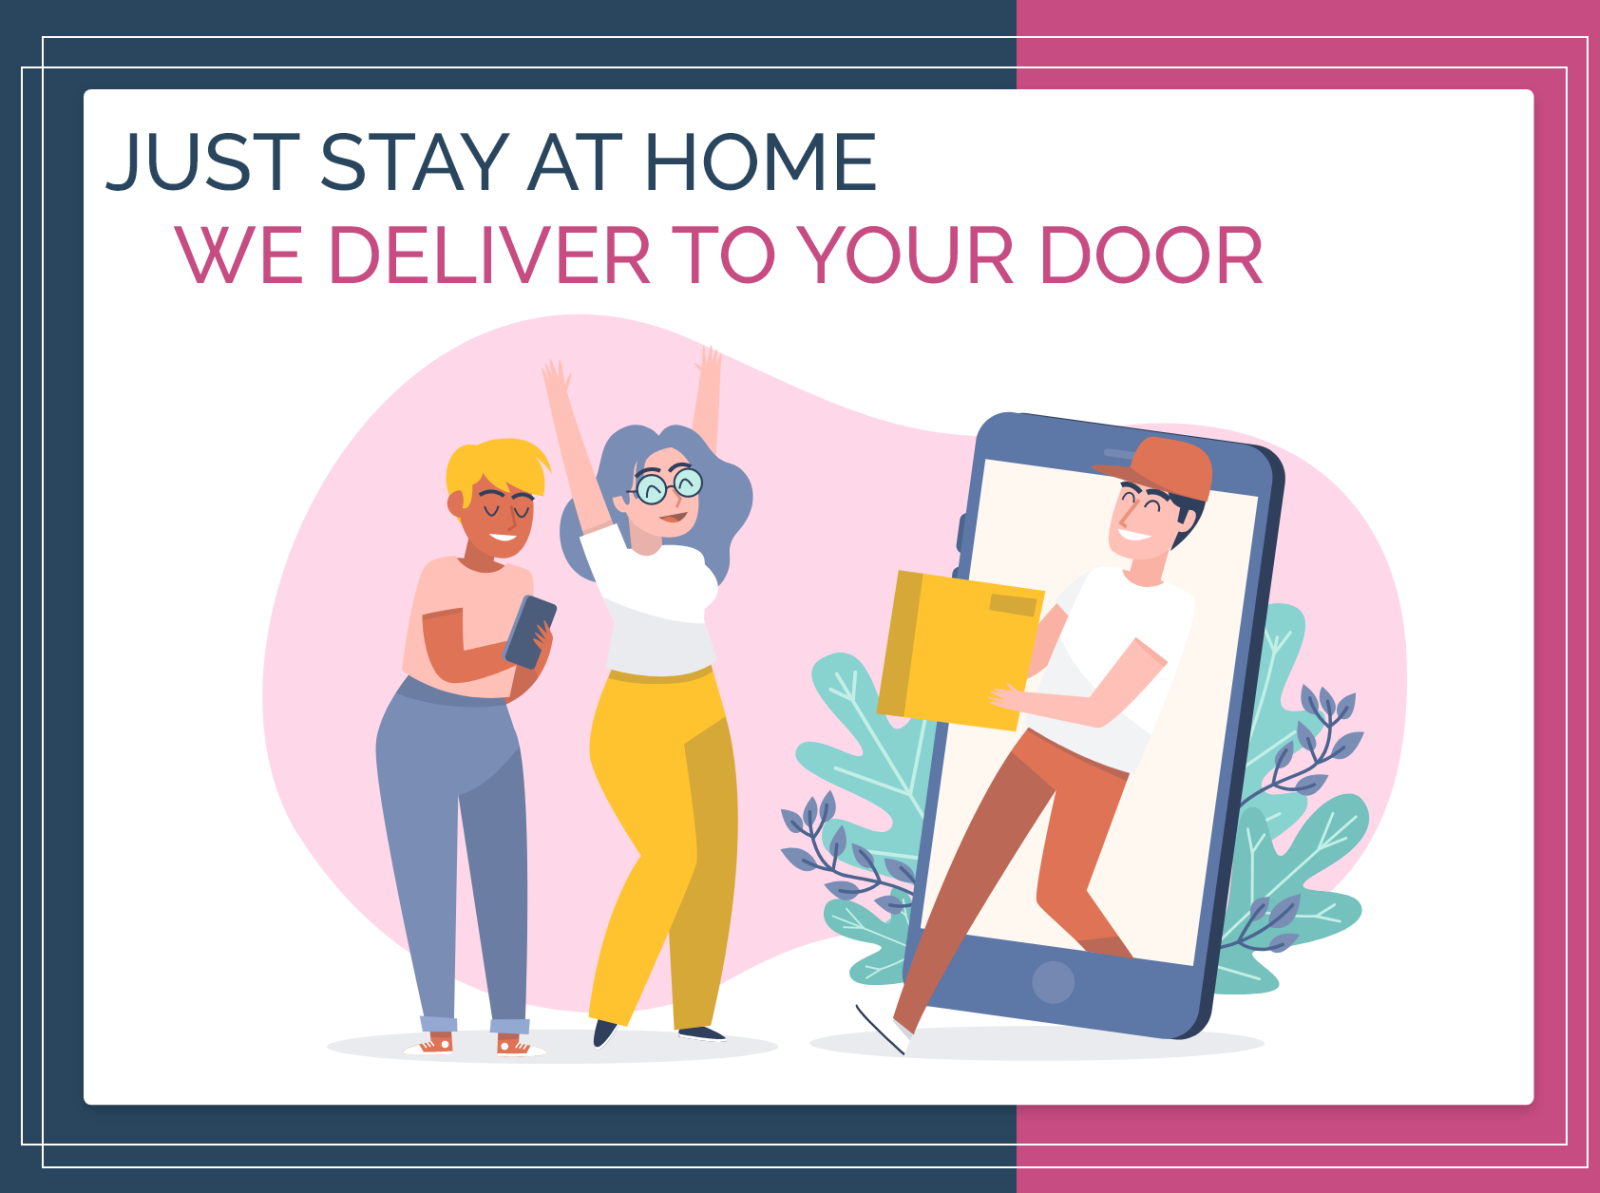 Stay At Home We Deliver At Your Doorstep By Consolebit Technologies On Dribbble